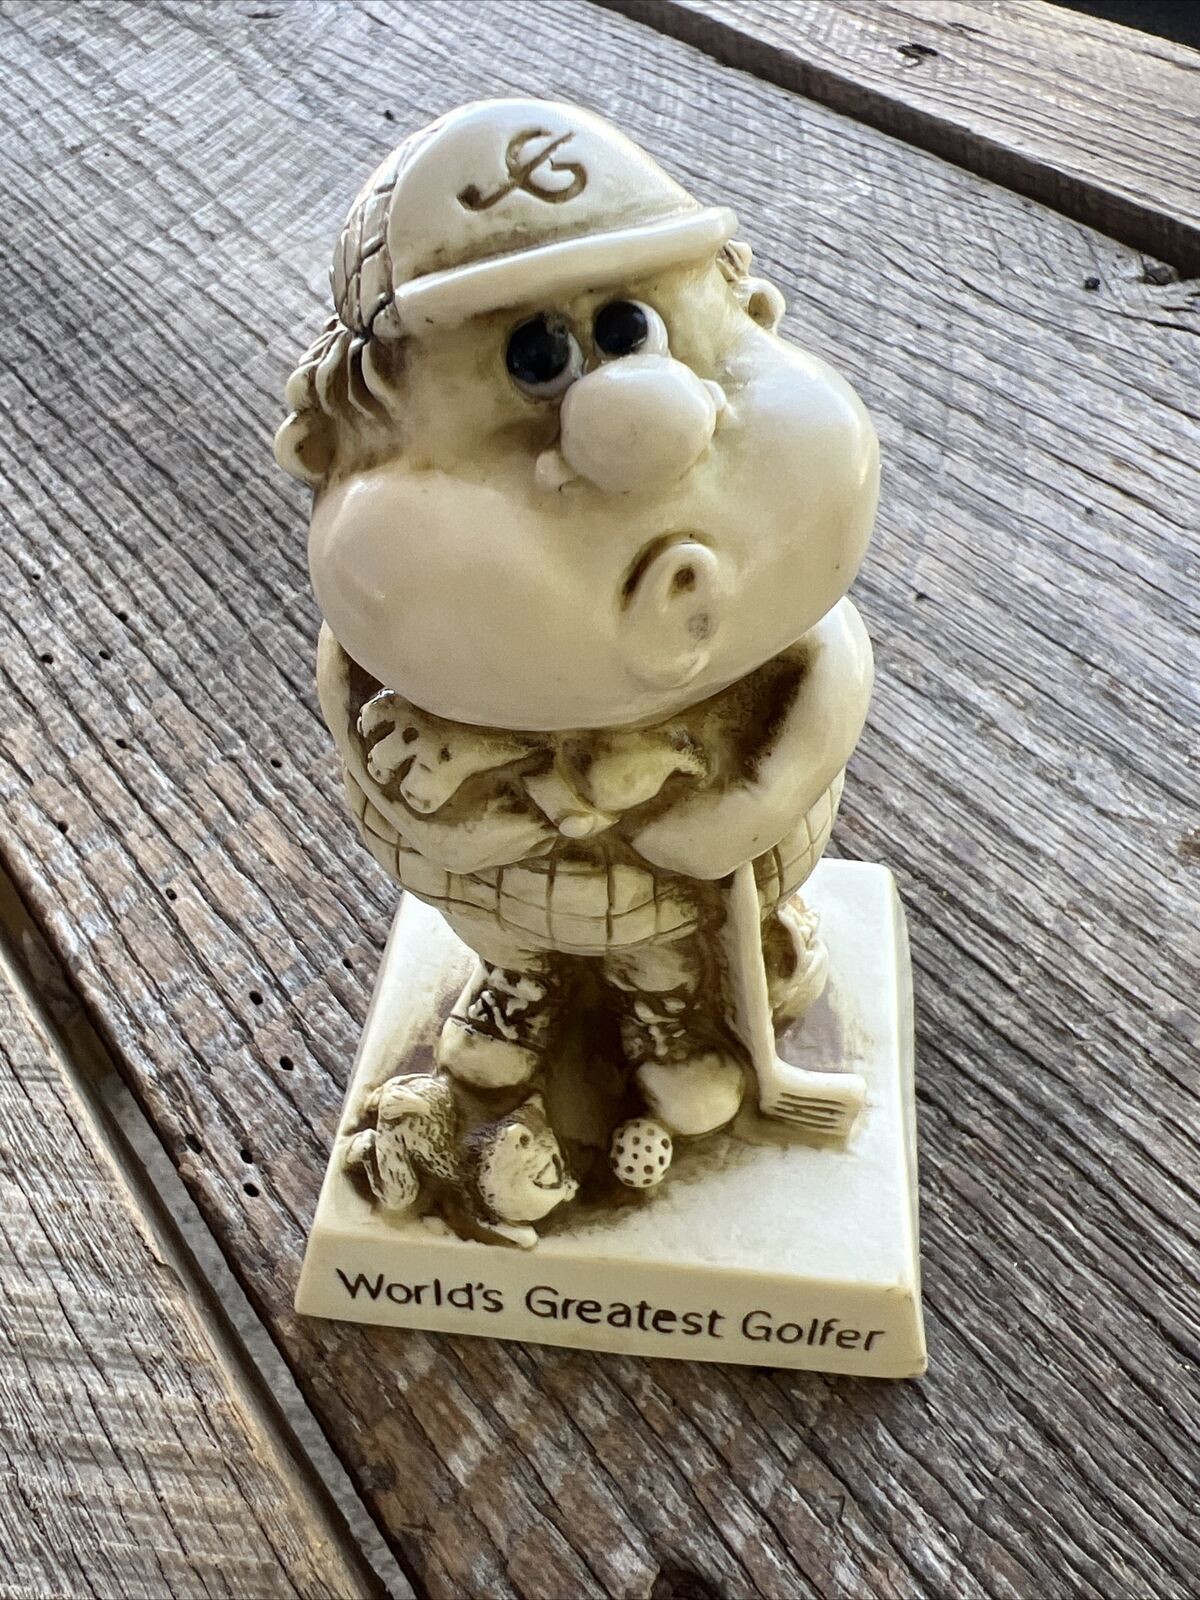 Vintage Russ Berrie & Co Figurine - World\'s Greatest Golfer - 1977 - Made in USA